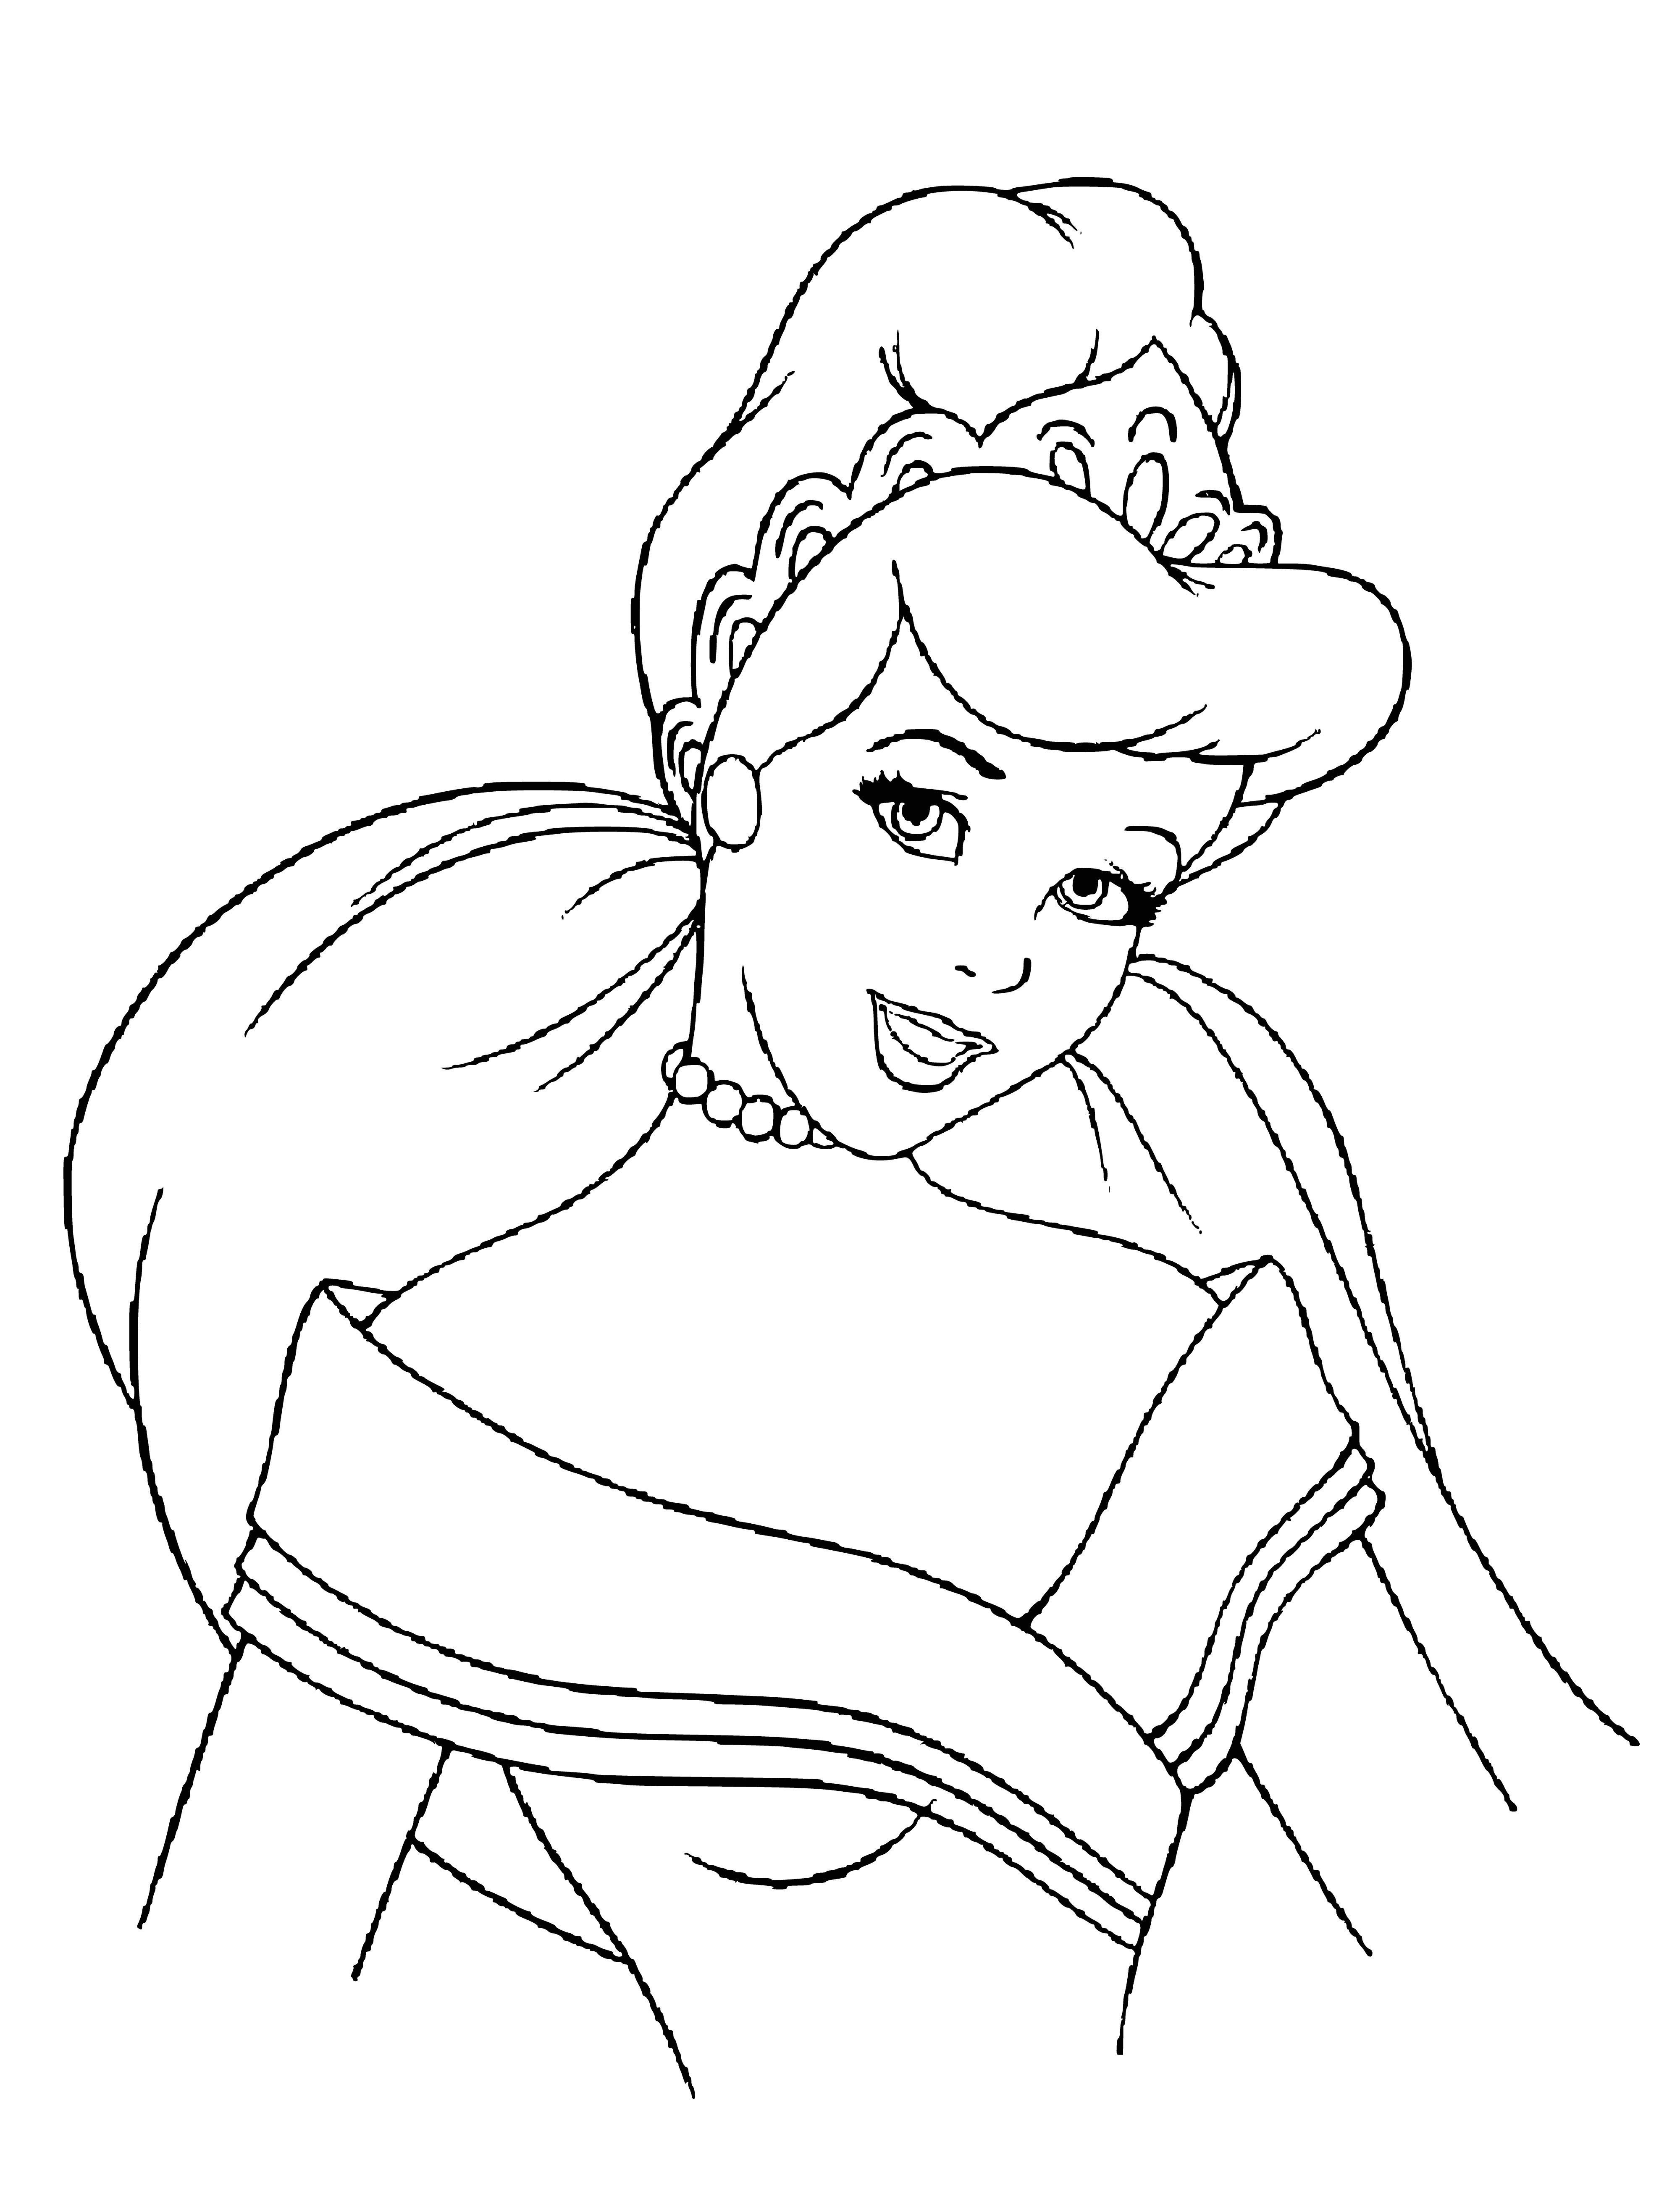 coloring page: Cinderella stands nervously before a fireplace, fair-skinned with dark hair and a light blue dress. Silver earrings, a white collar and her hands clasped complete her coloring page.